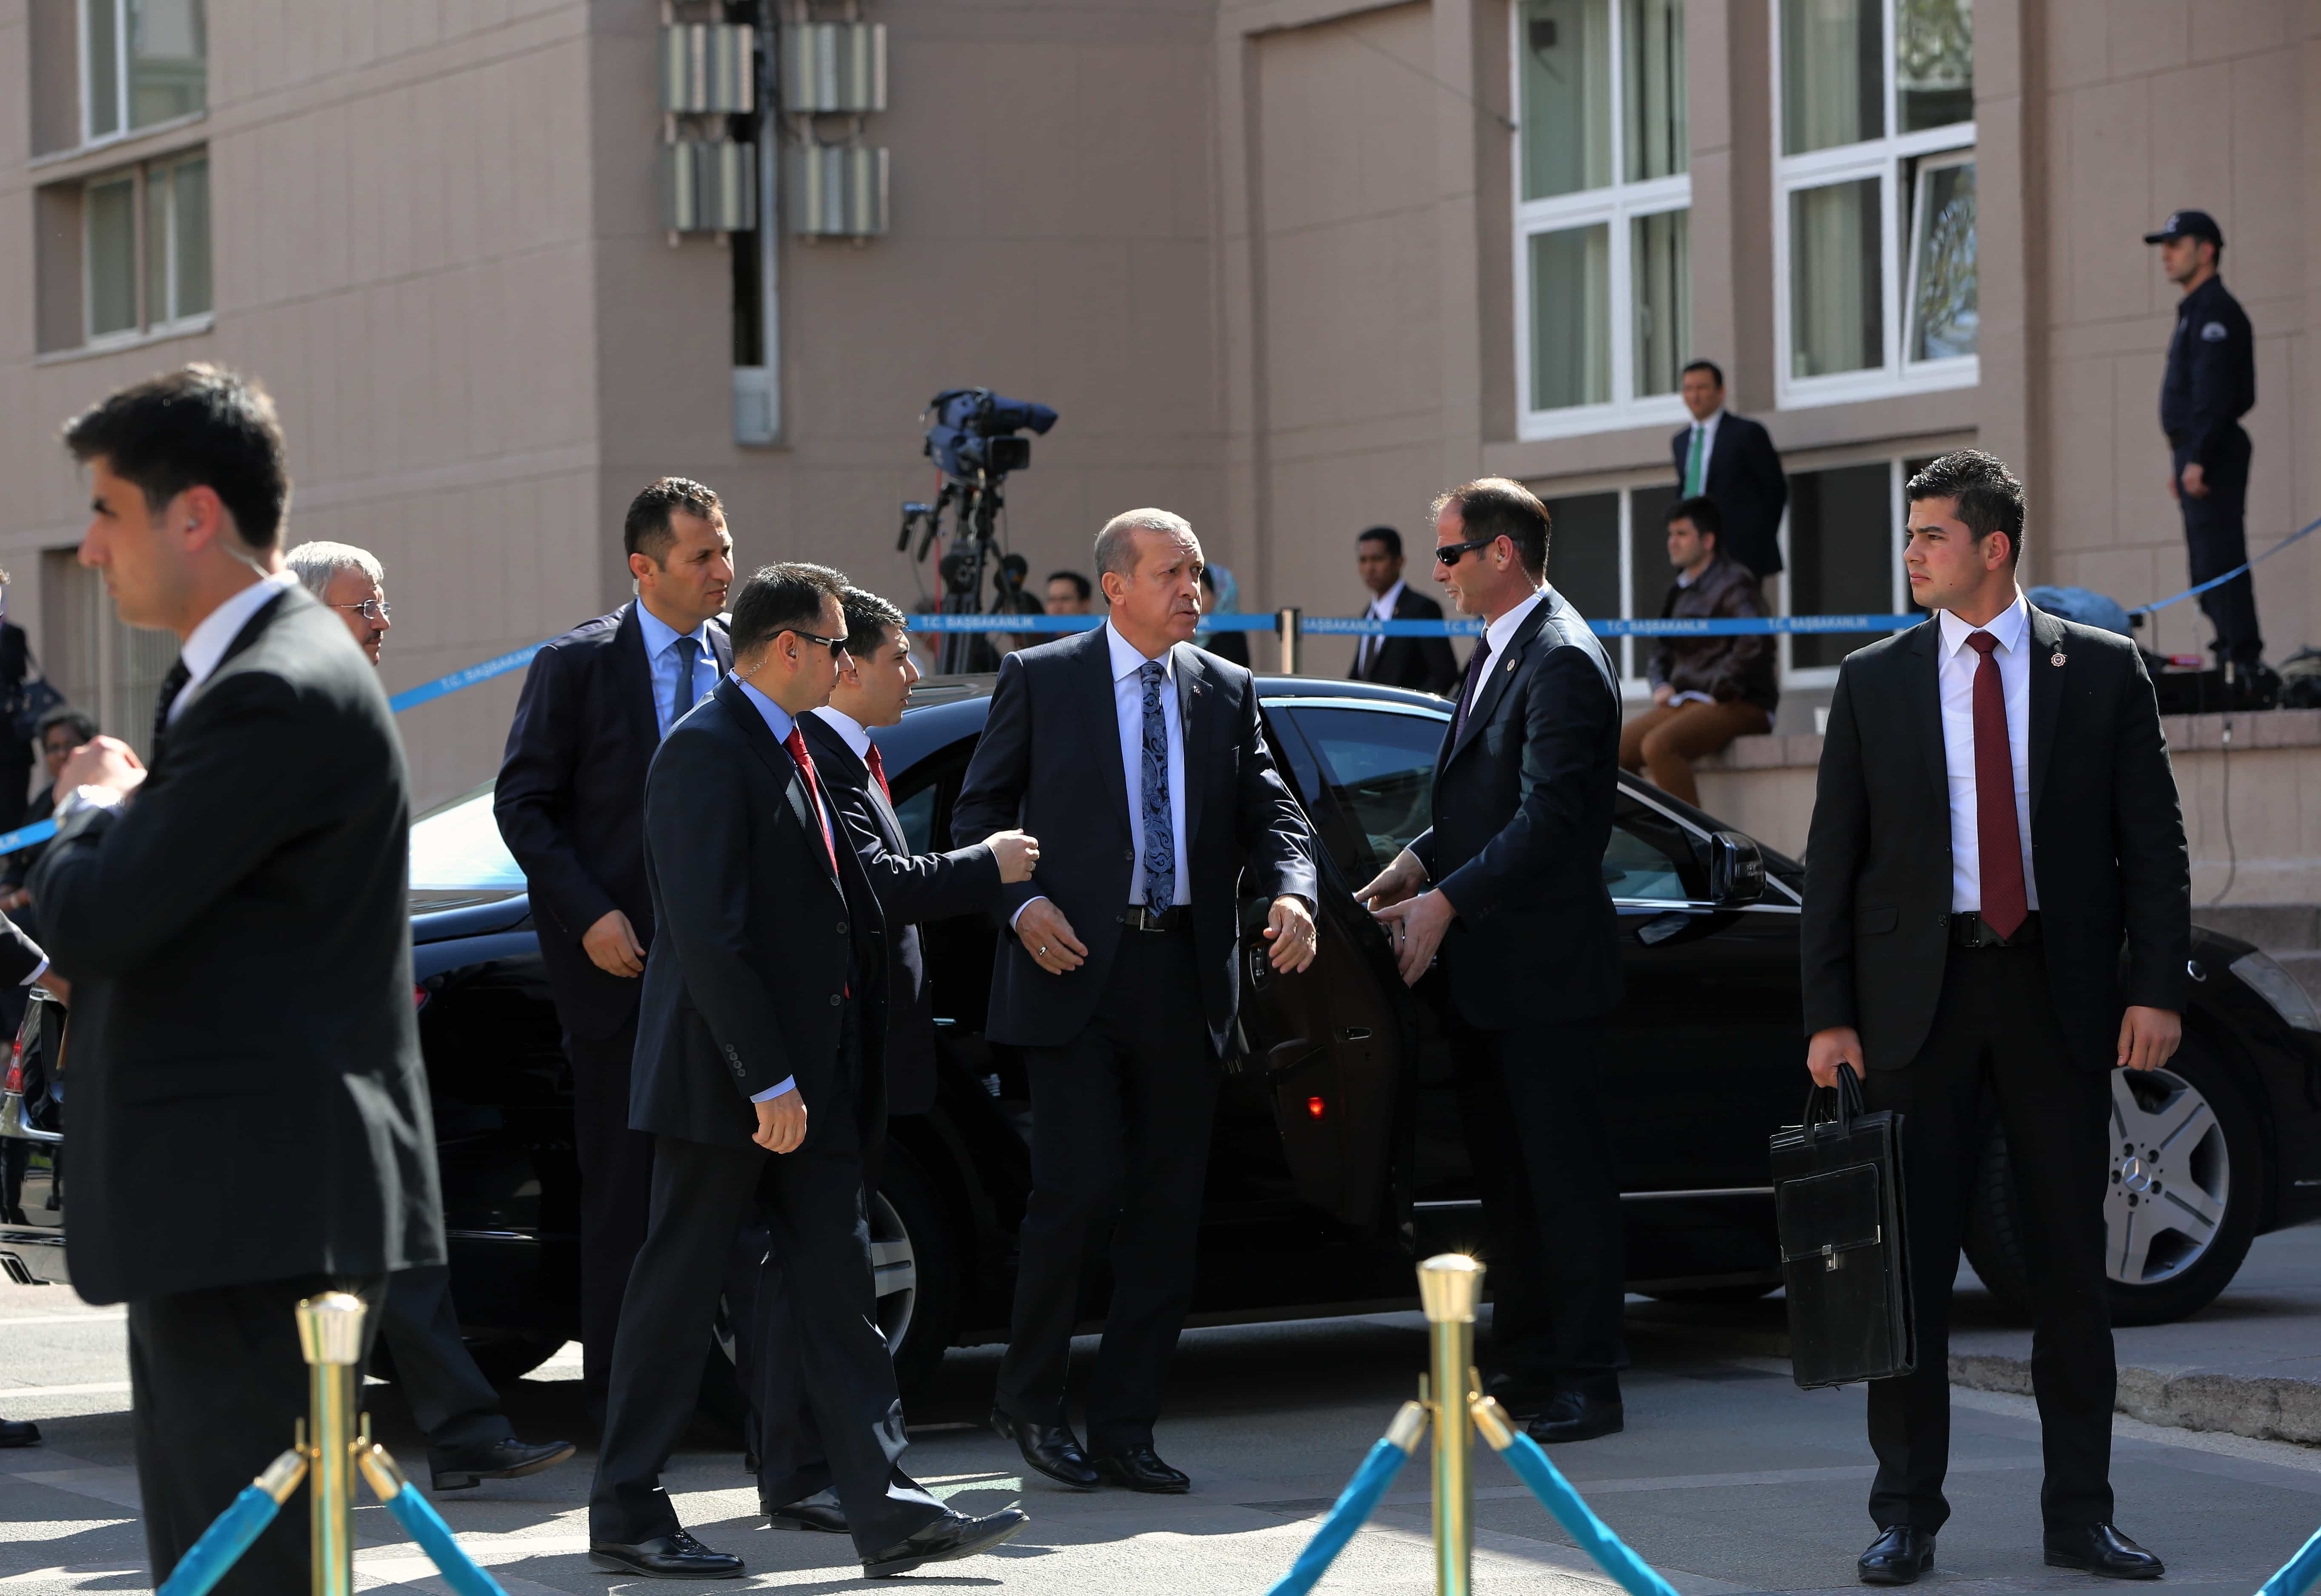 Turkish Prime Minister Recep Tayyip Erdogan, centre, is surrounded by his security members outside his office in Ankara, 17 April 2014., AP Photo/Burhan Ozbilici